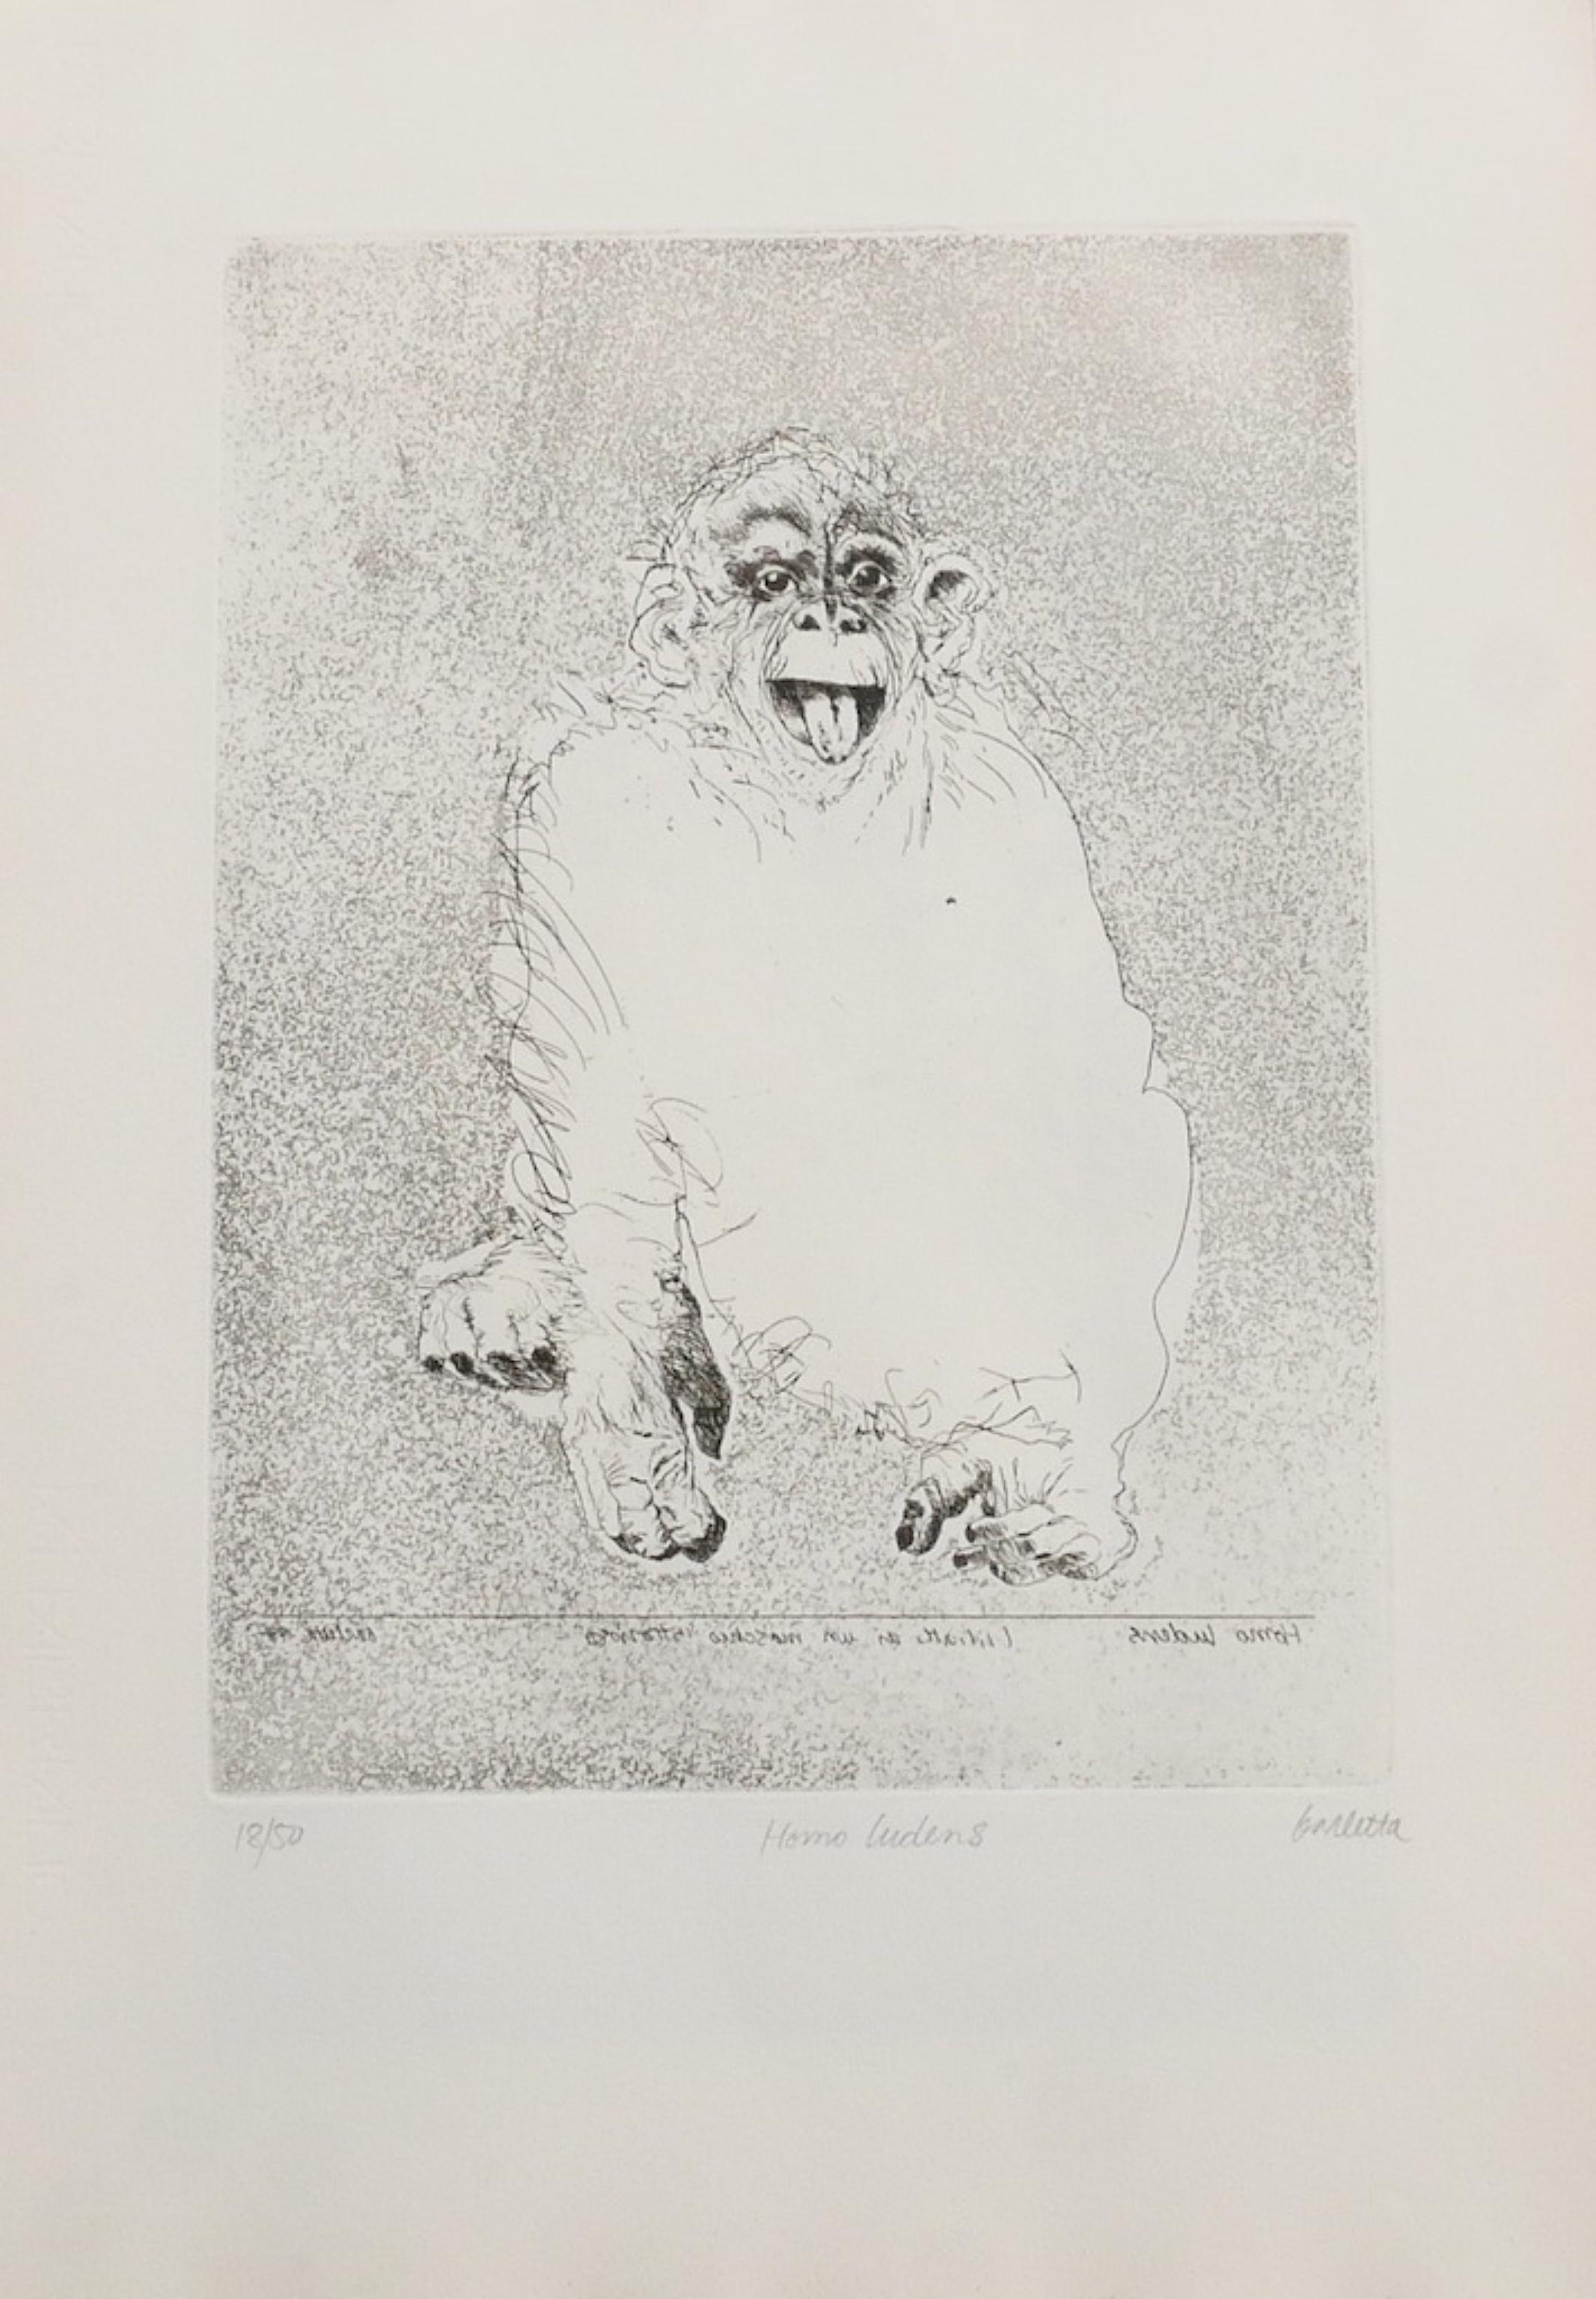 Homo Ludens is an original etching realized by Sergio Barletta in 1991.

Hand-signed lower right in pencil, and titled lower center "Homo Ludens". Numbered lower left, from the edition of 50 prints.

In very good conditions. Image Dimensions: 33 x